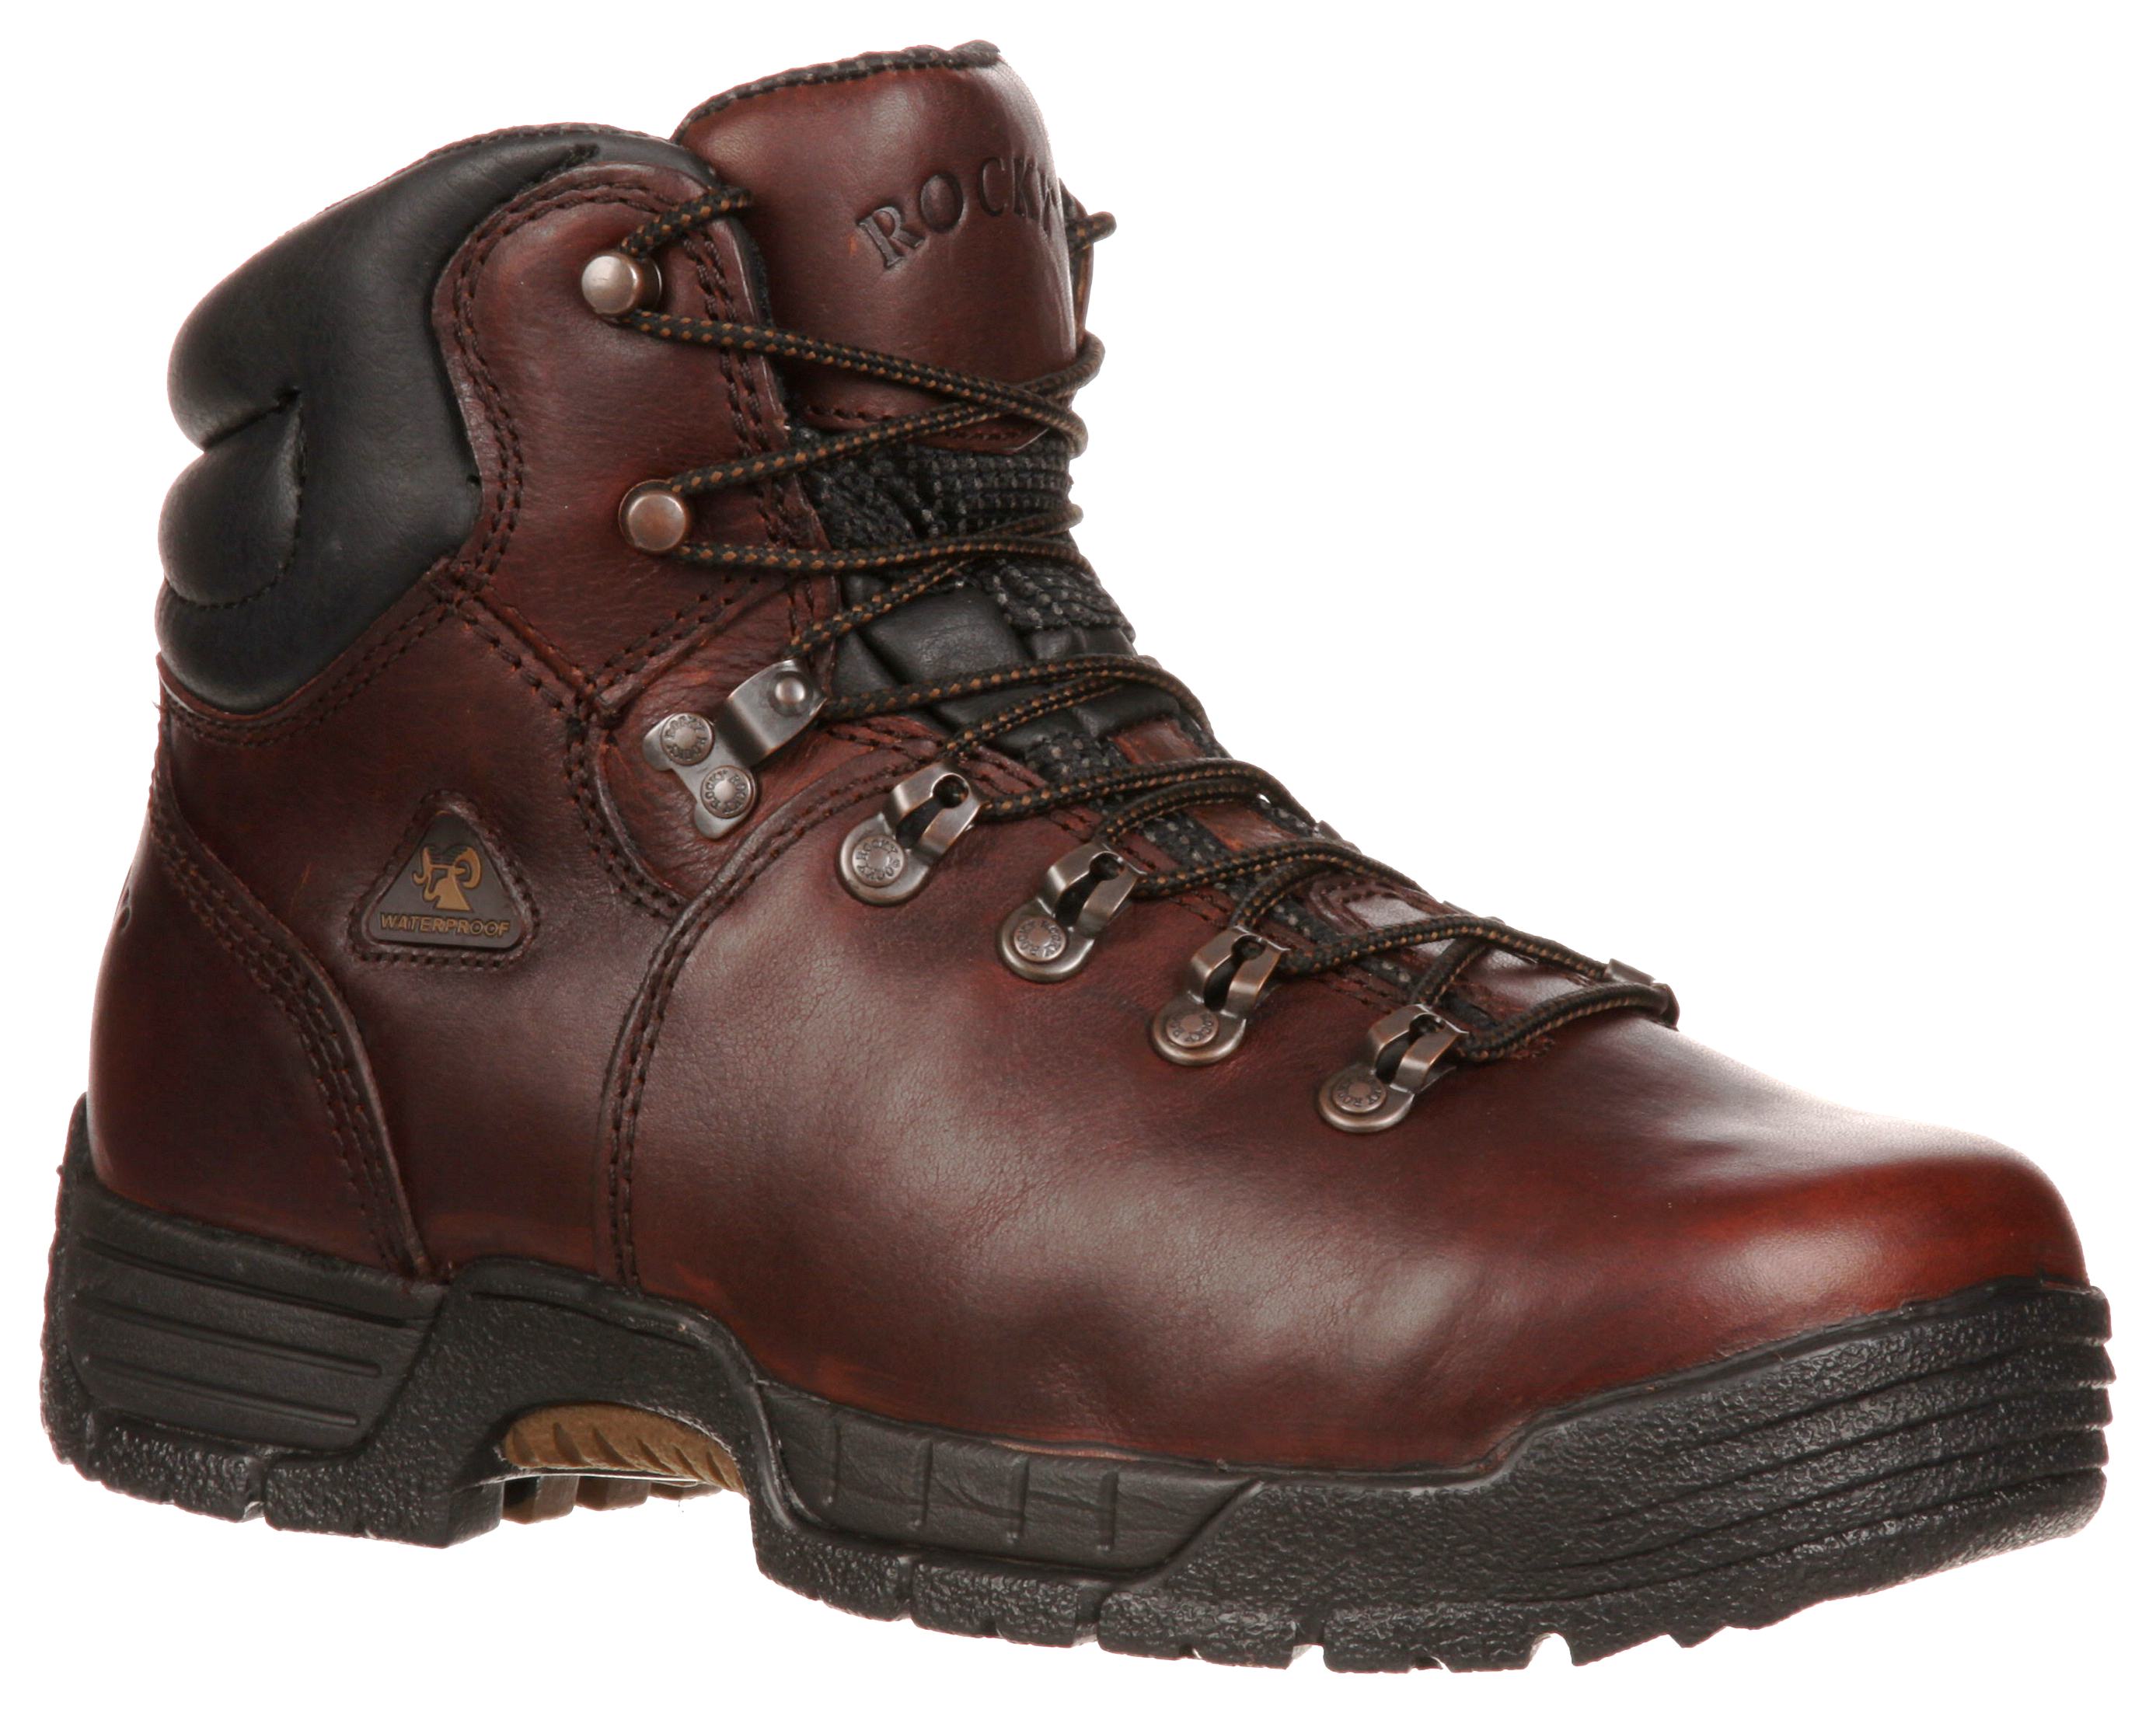 ROCKY MobiLite Waterproof Work Boots for Men - Brown - 10.5 M